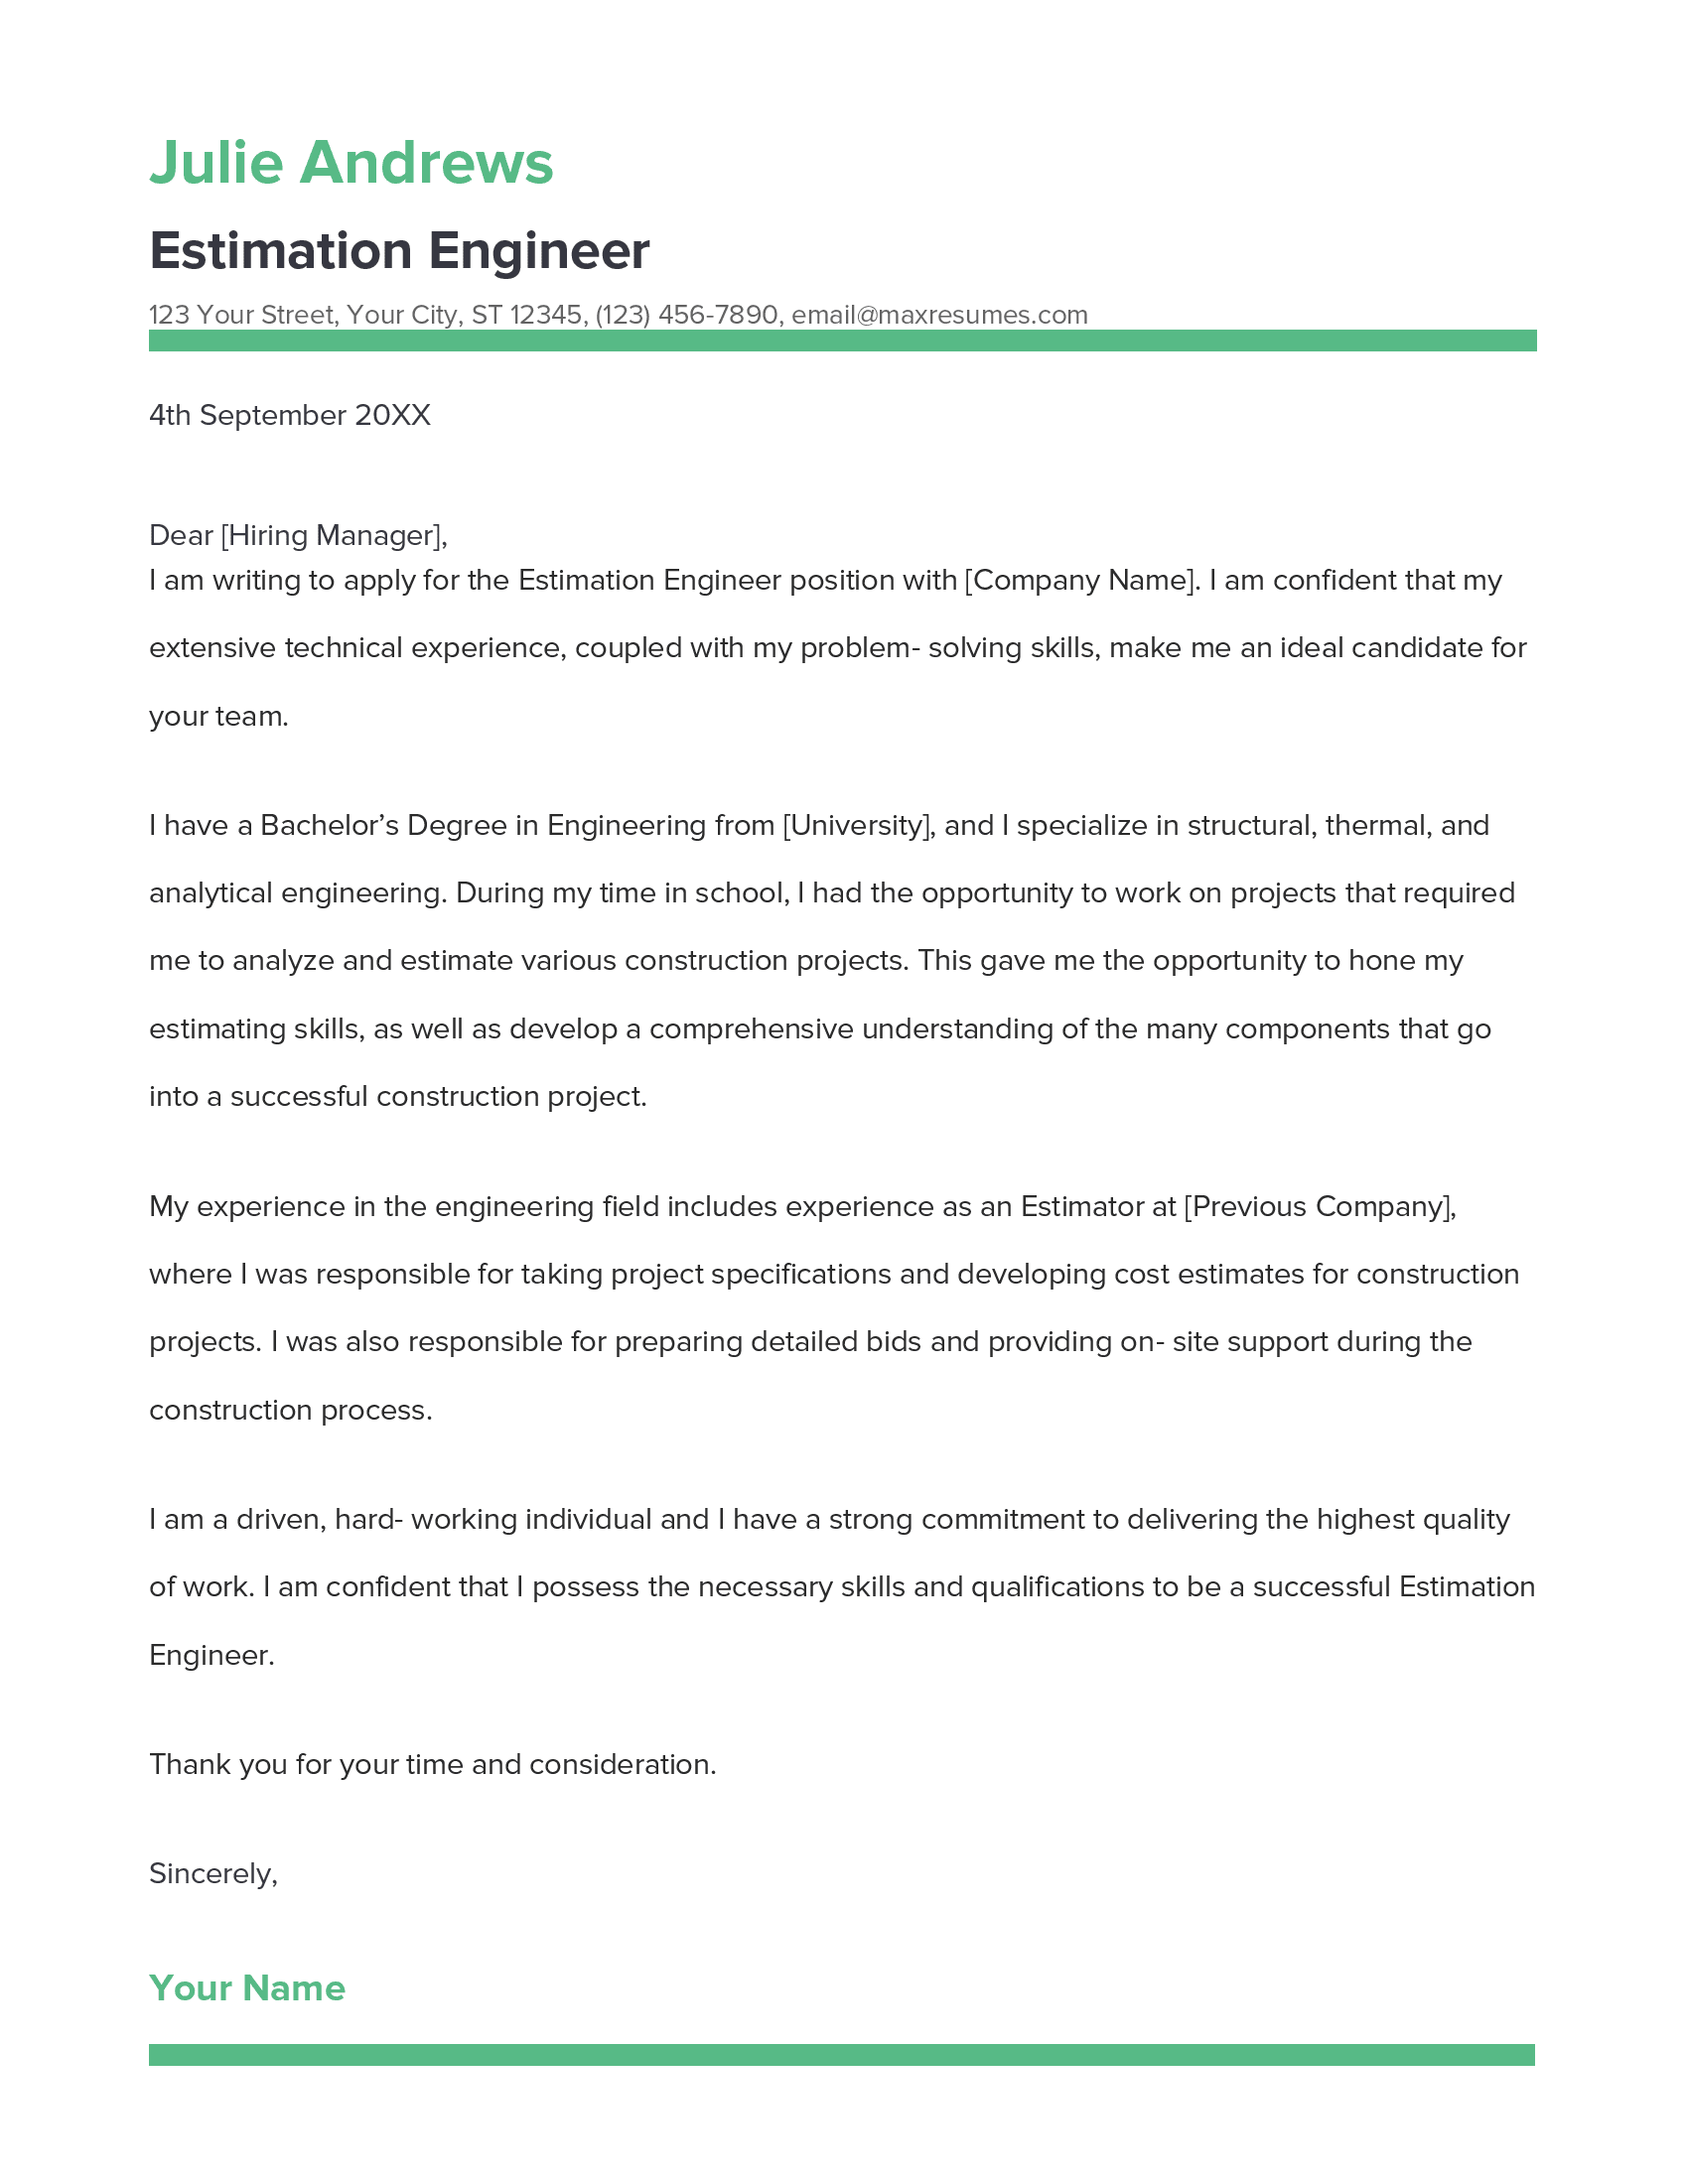 Estimation Engineer Cover Letter Example